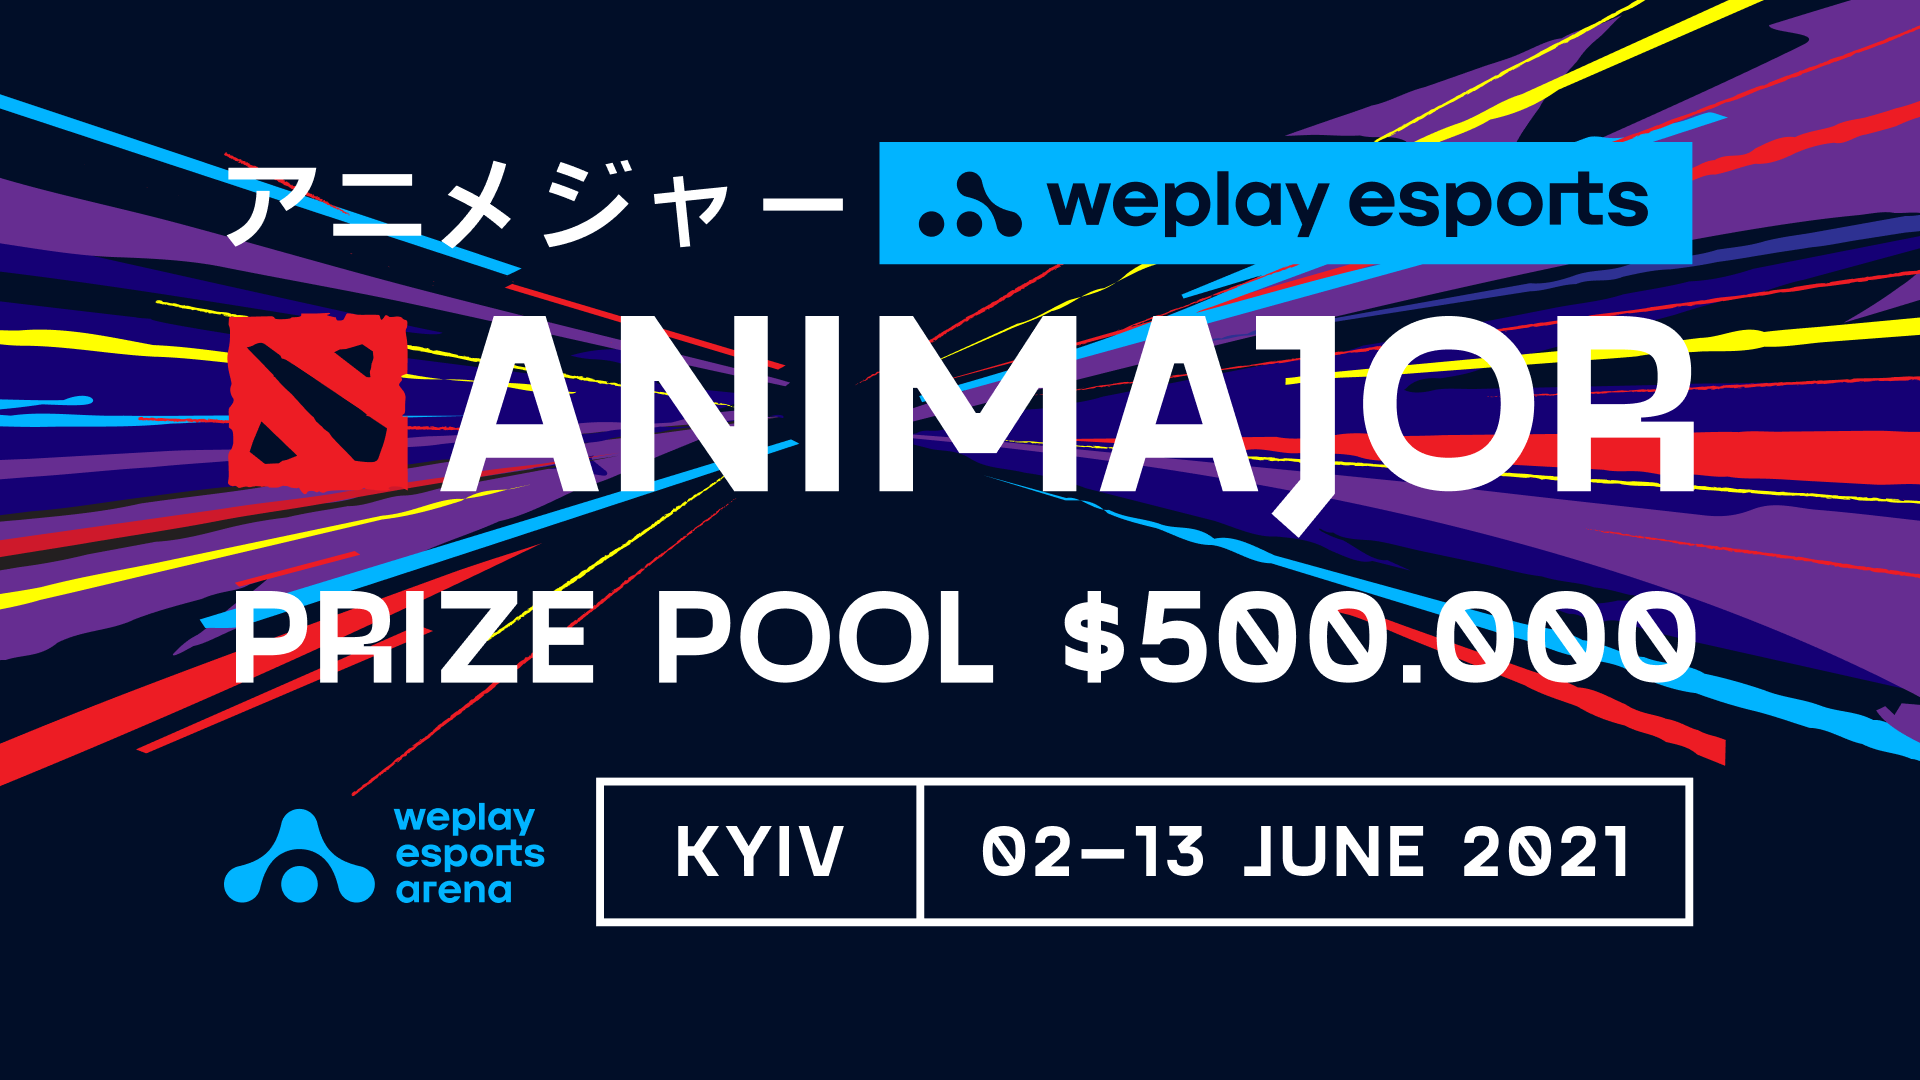 One of the key visuals of WePlay AniMajor.